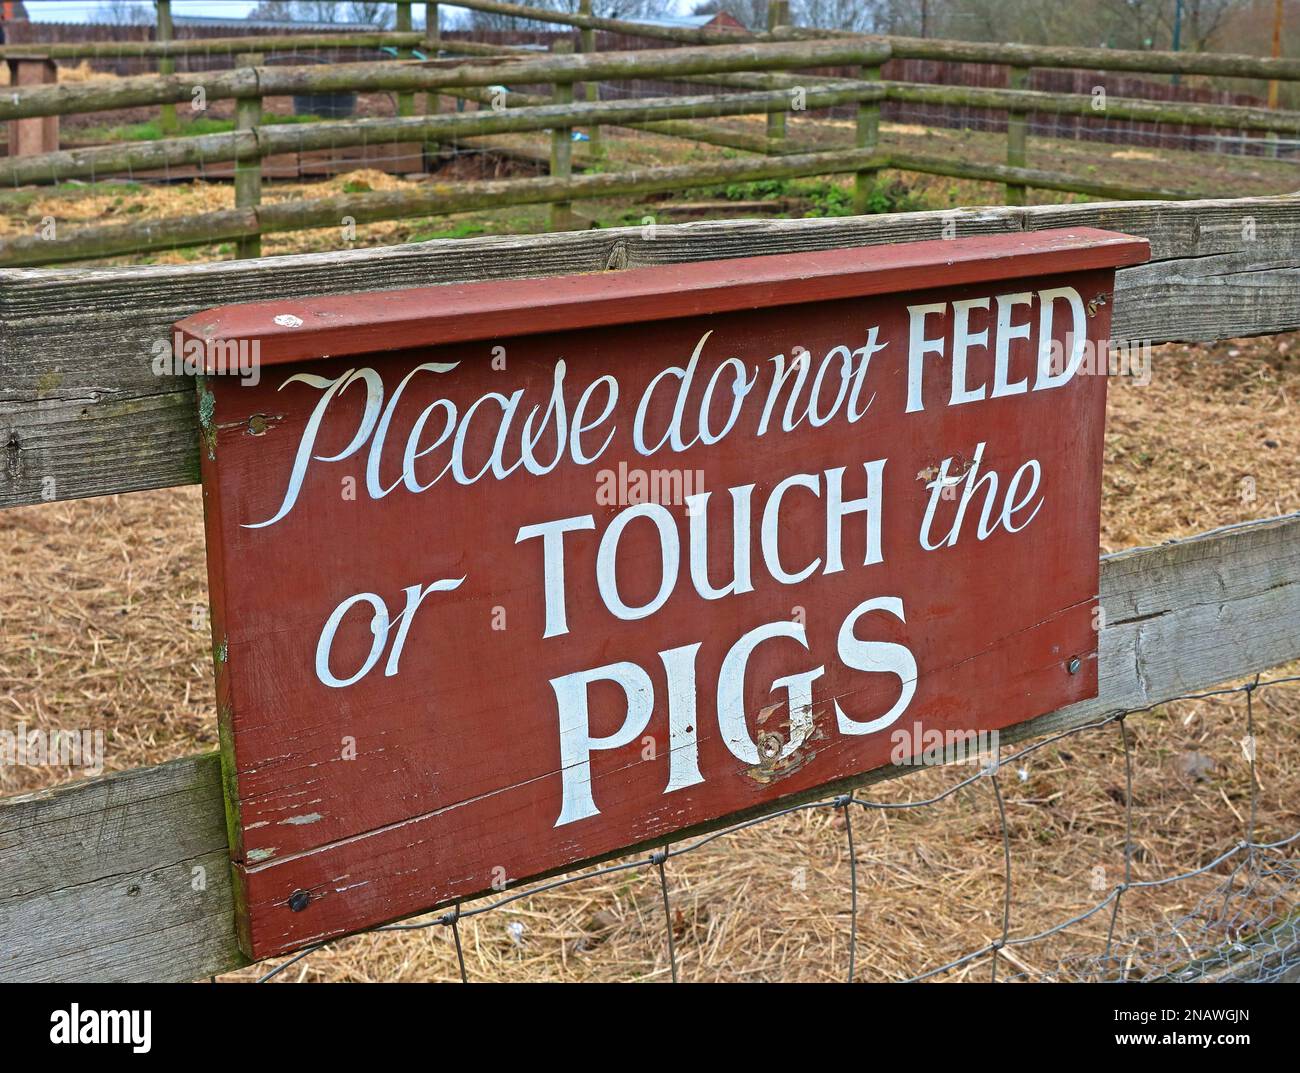 Brown farmyard sign - Please do not feed or Touch the Pigs Stock Photo